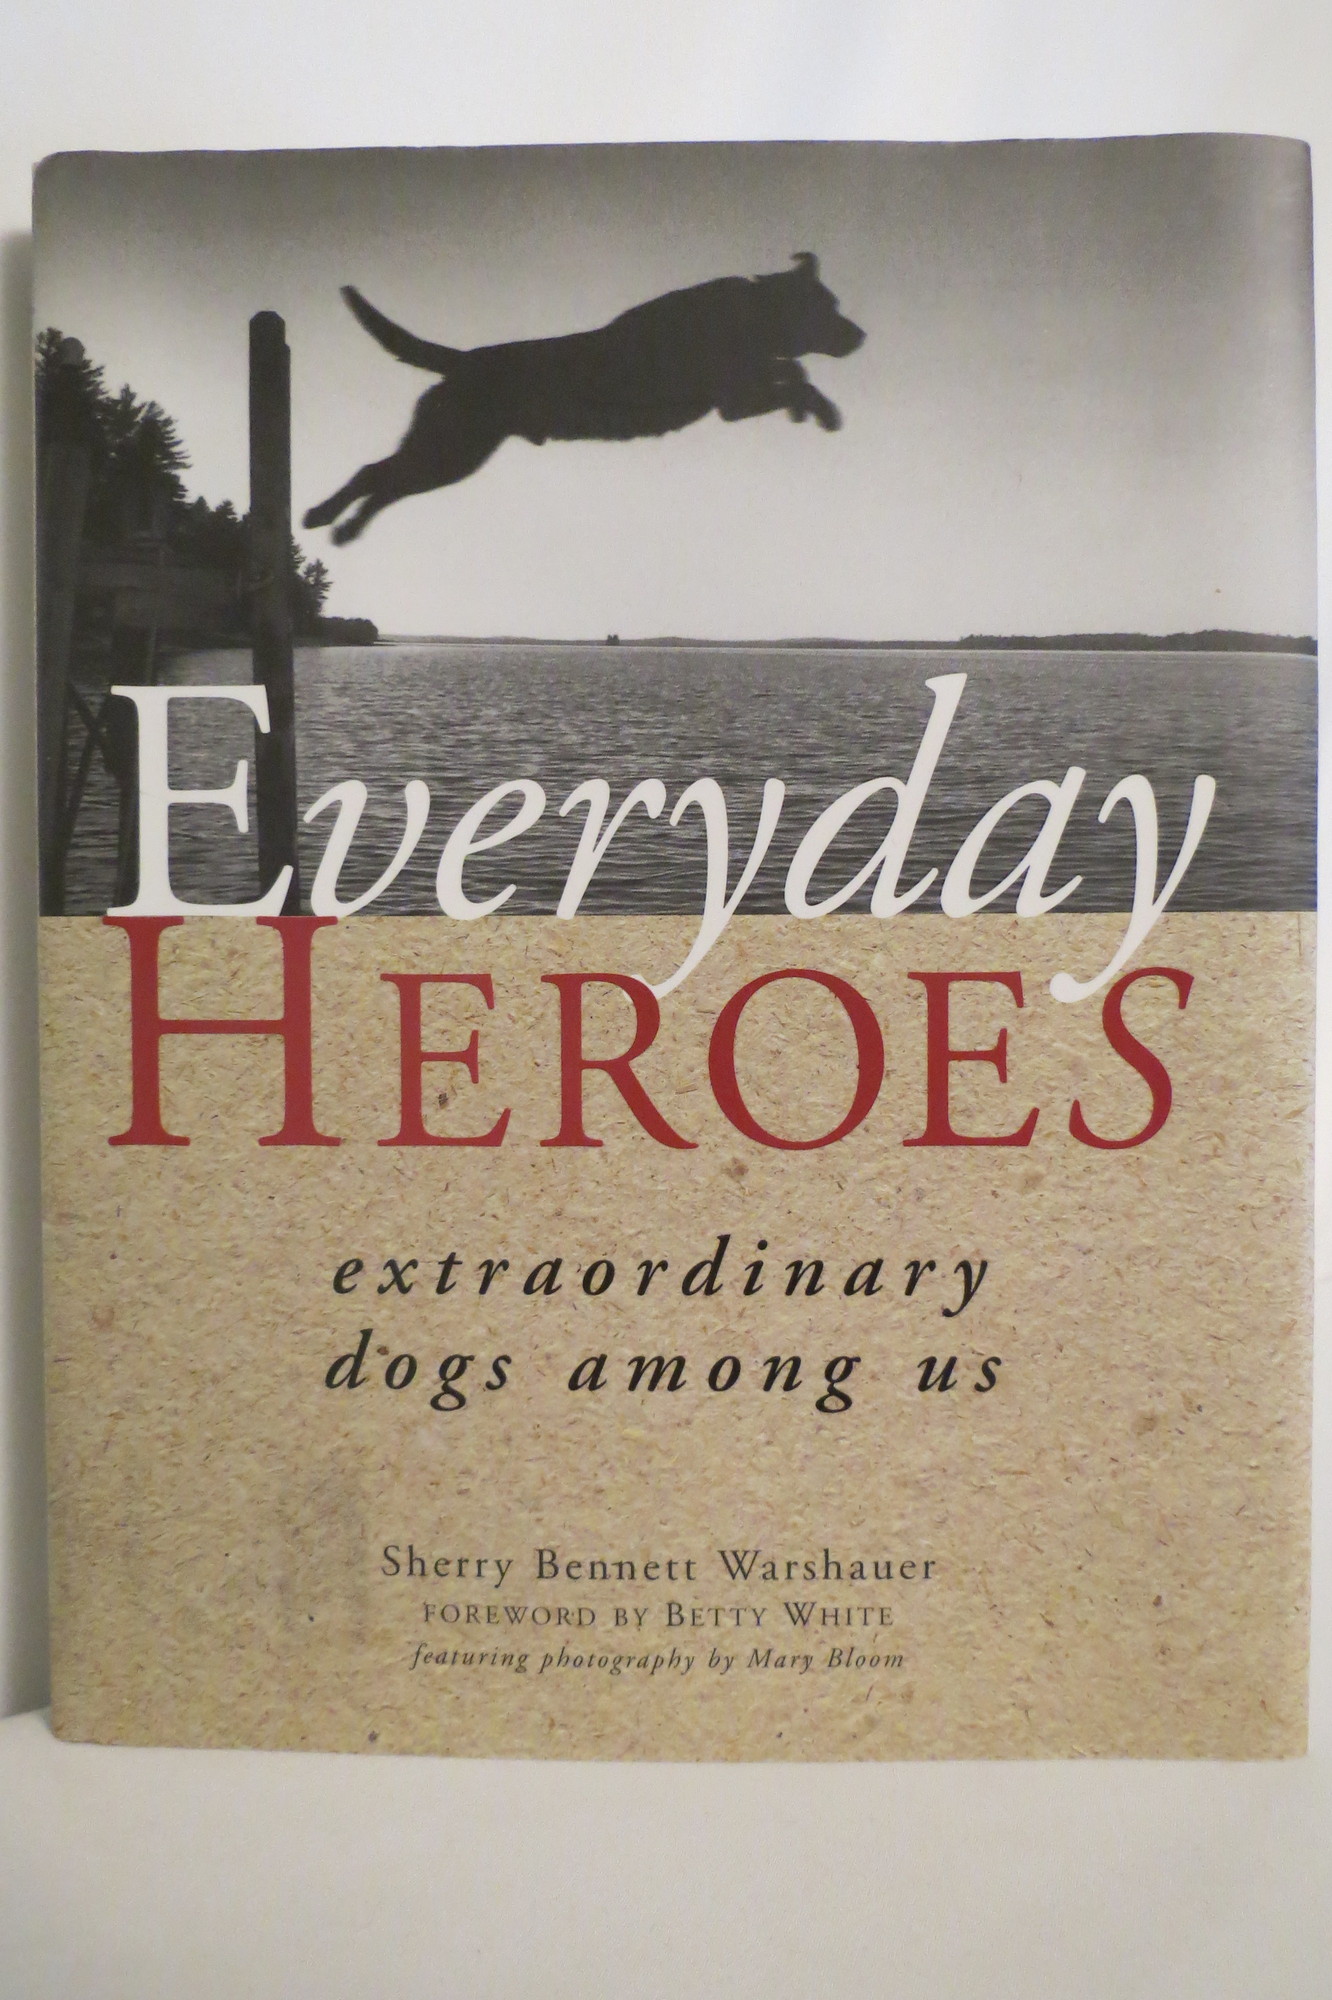 Image for EVERDAY HEROES Extraordinary Dogs Among Us (DJ protected by a brand new, clear, acid-free mylar cover)